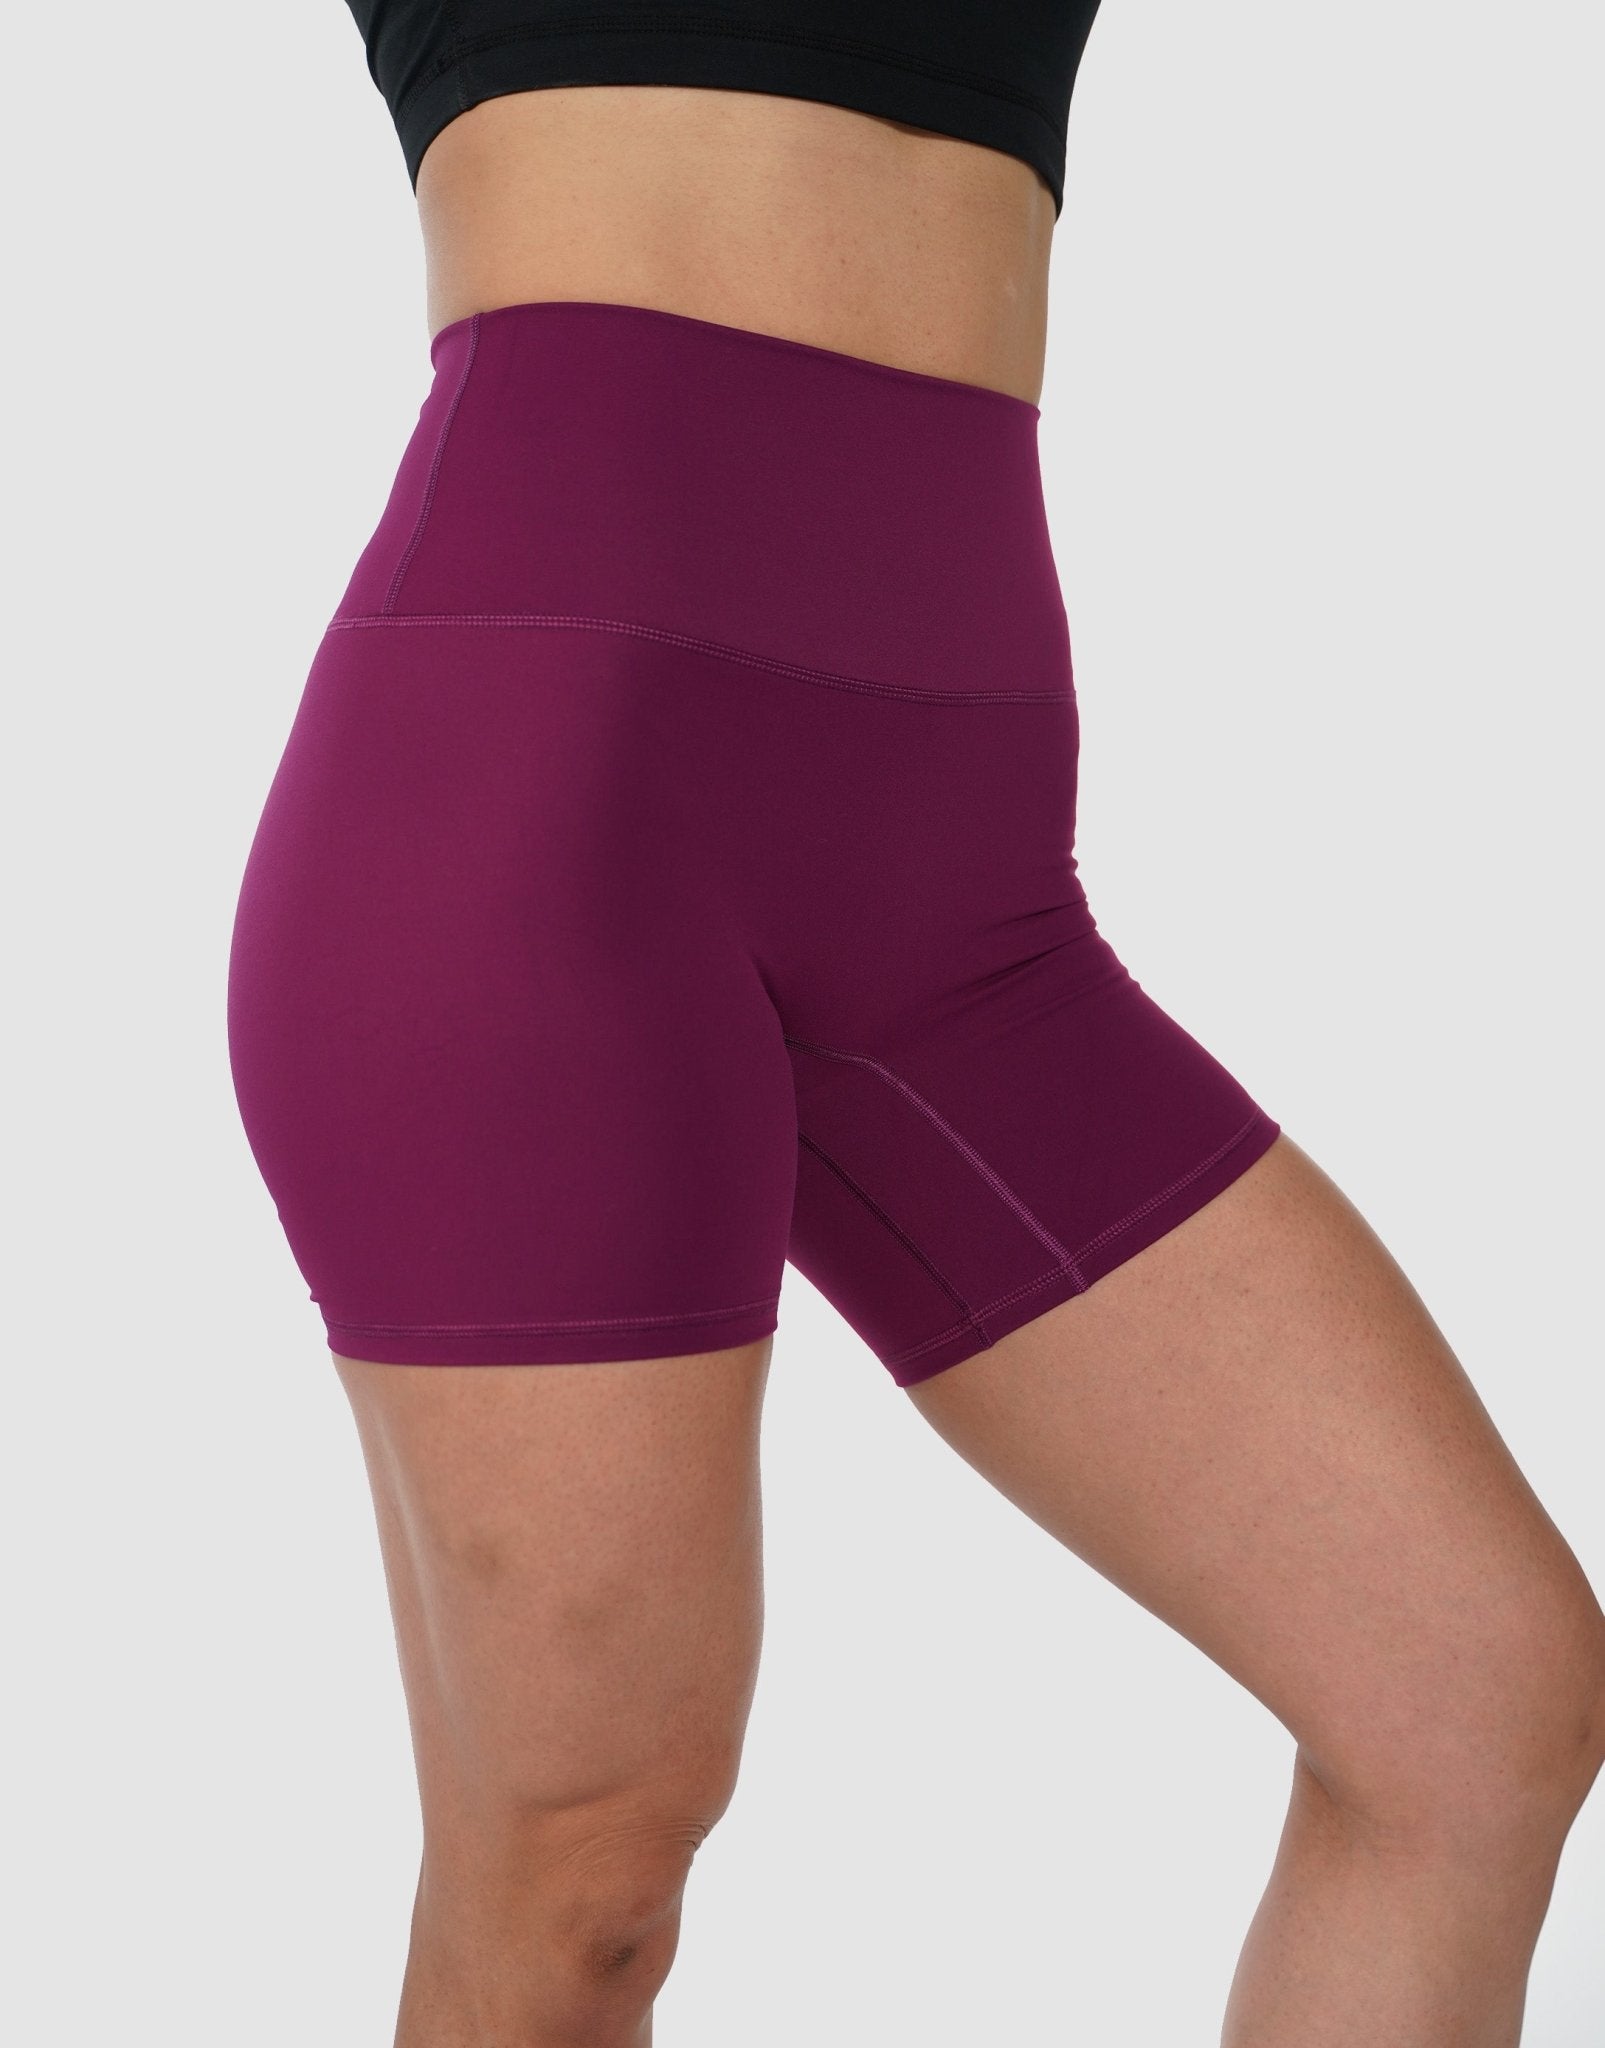 Finelylove Bike Shorts With Pockets Women Heynuts Shorts Compression Fit  High Waist Rise Solid Purple M